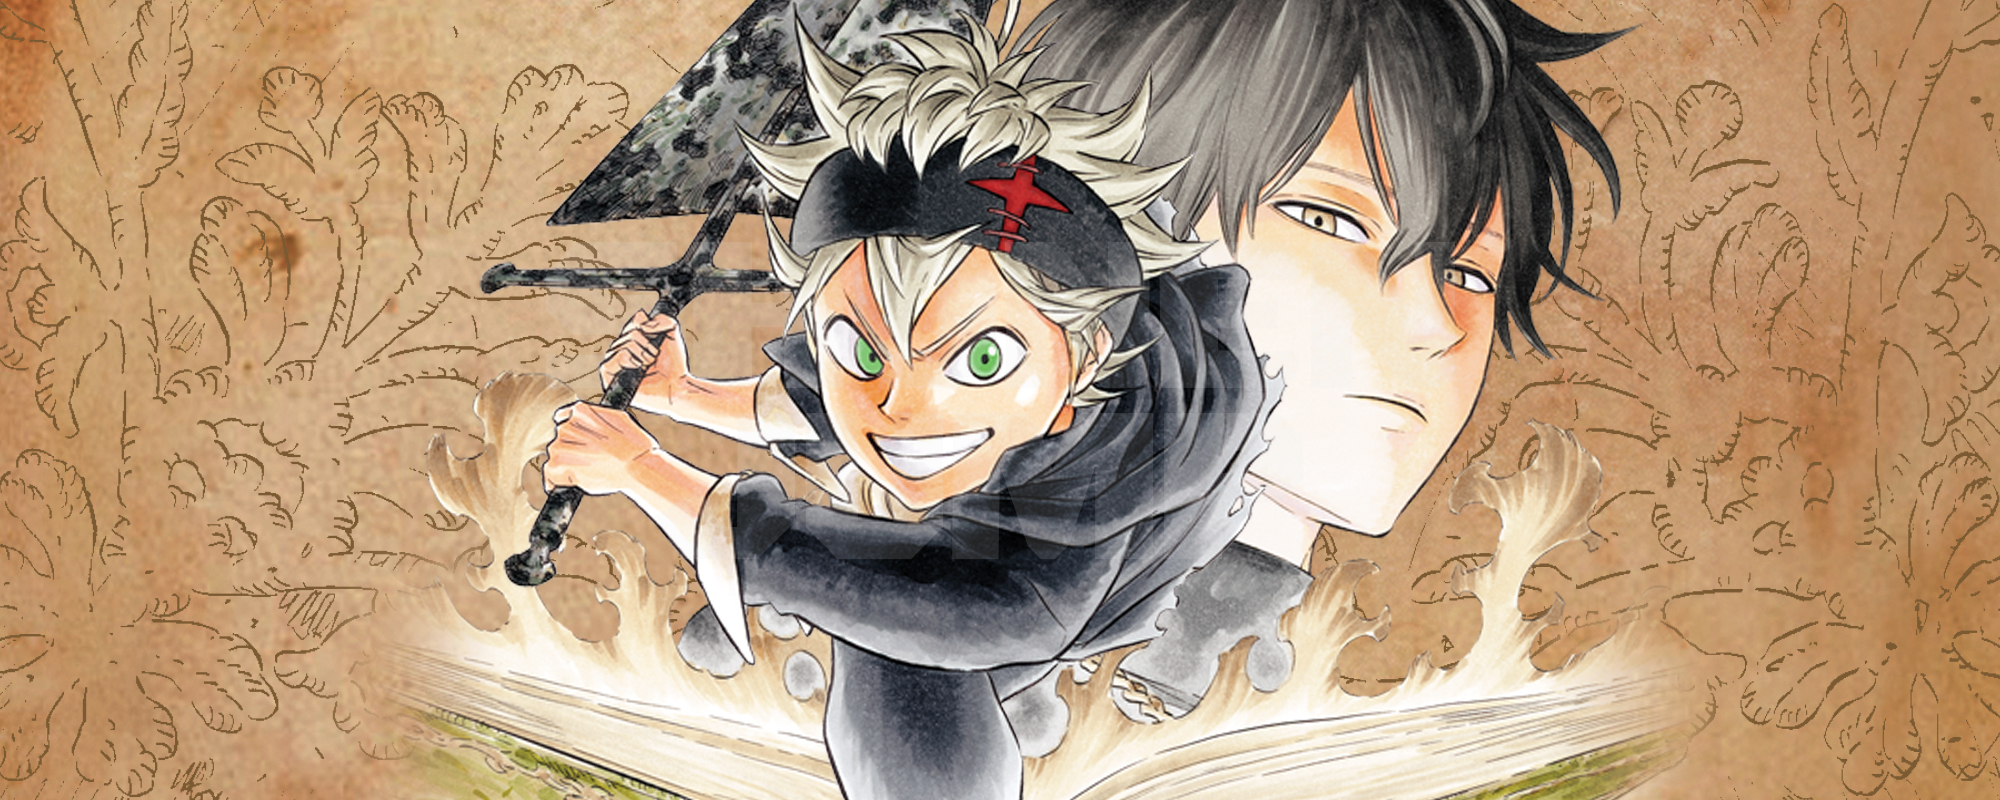 Black Clover Chapter 368 Release date 